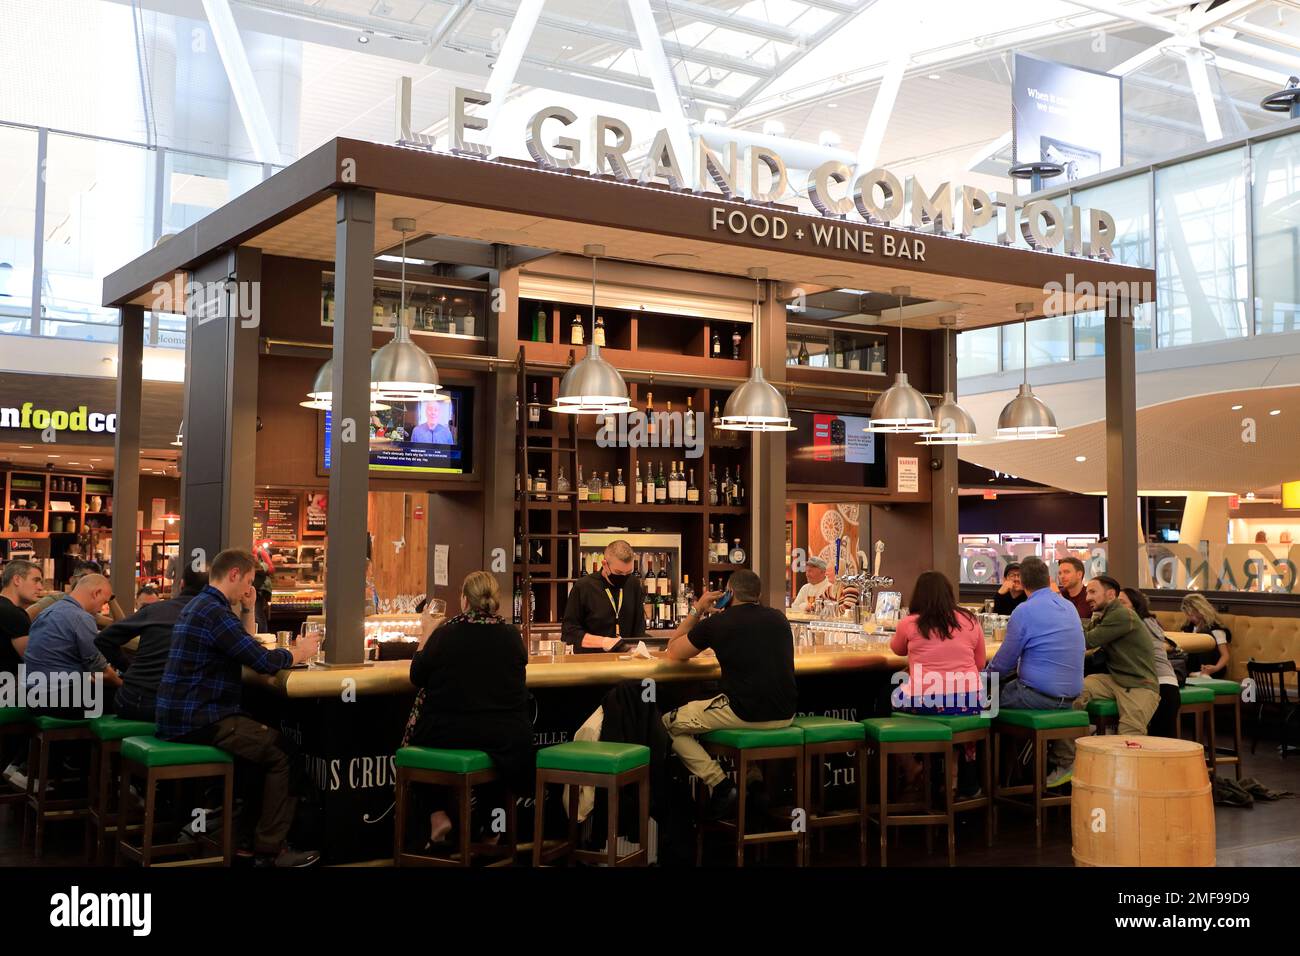 Le Grand Comptoir food and wine bar with customers inside the terminal of JFK International airport.New York City.New York.USA Stock Photo